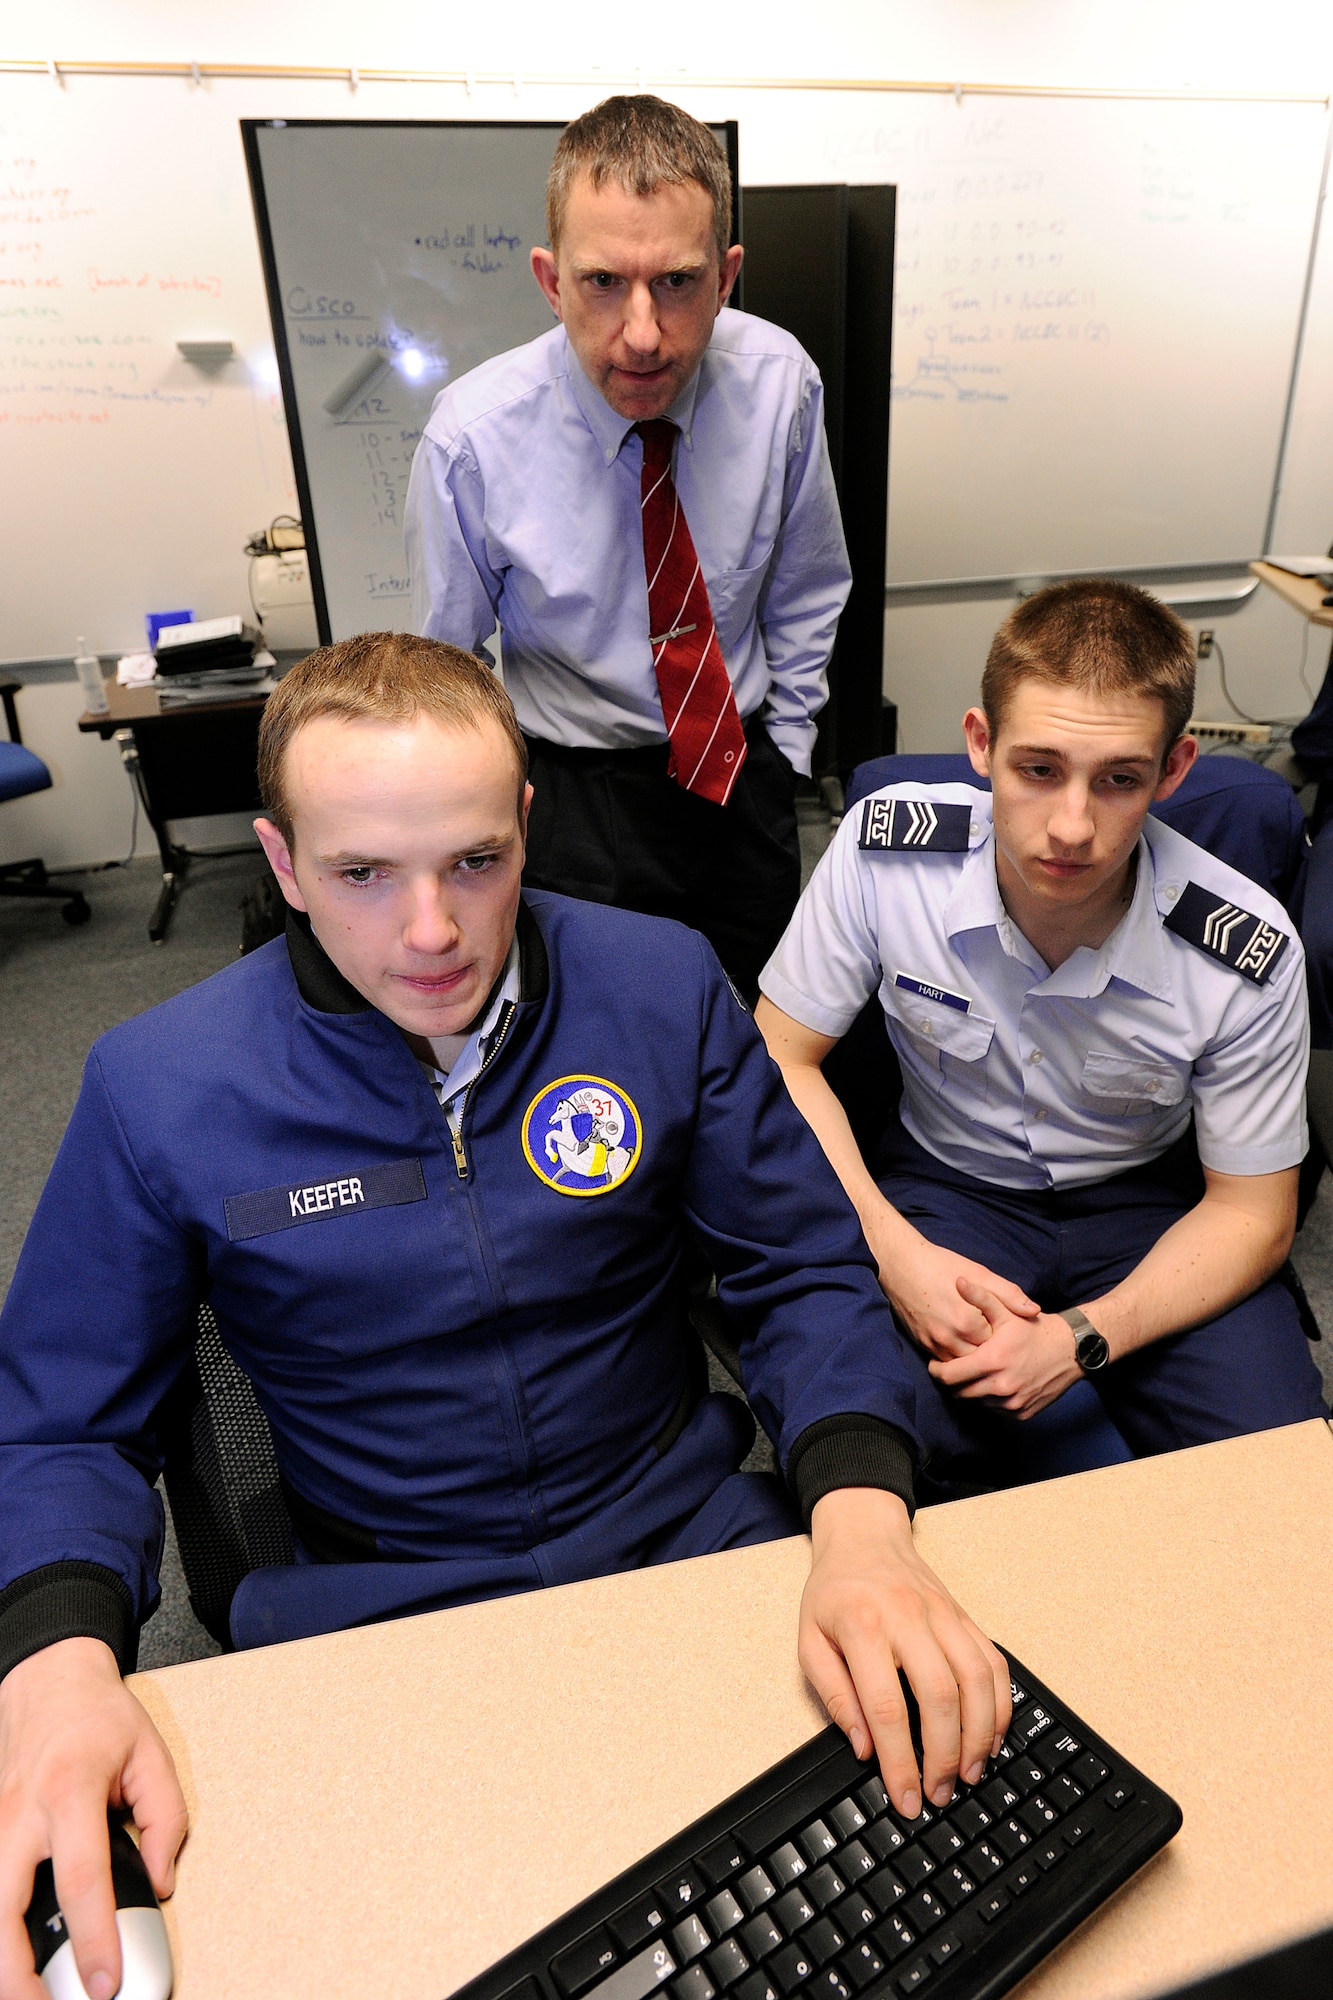 Cadet 1st Class Jordan Keefer (bottom left) and Cadet 2nd Class Nathan Hart (bottom right) work in the Air Force Academy's cyberwarfare laboratory March 5, 2012. Keefer and Hart are two of the eight cadets in the Academy's cyberwarfare team, which won a regional competition in Denver March 2-3. Also pictured is Dr. Martin Carlisle, the professor and academics deputy director for the Academy's Computer Science Department. (U.S. Air Force photo/Mike Kaplan)